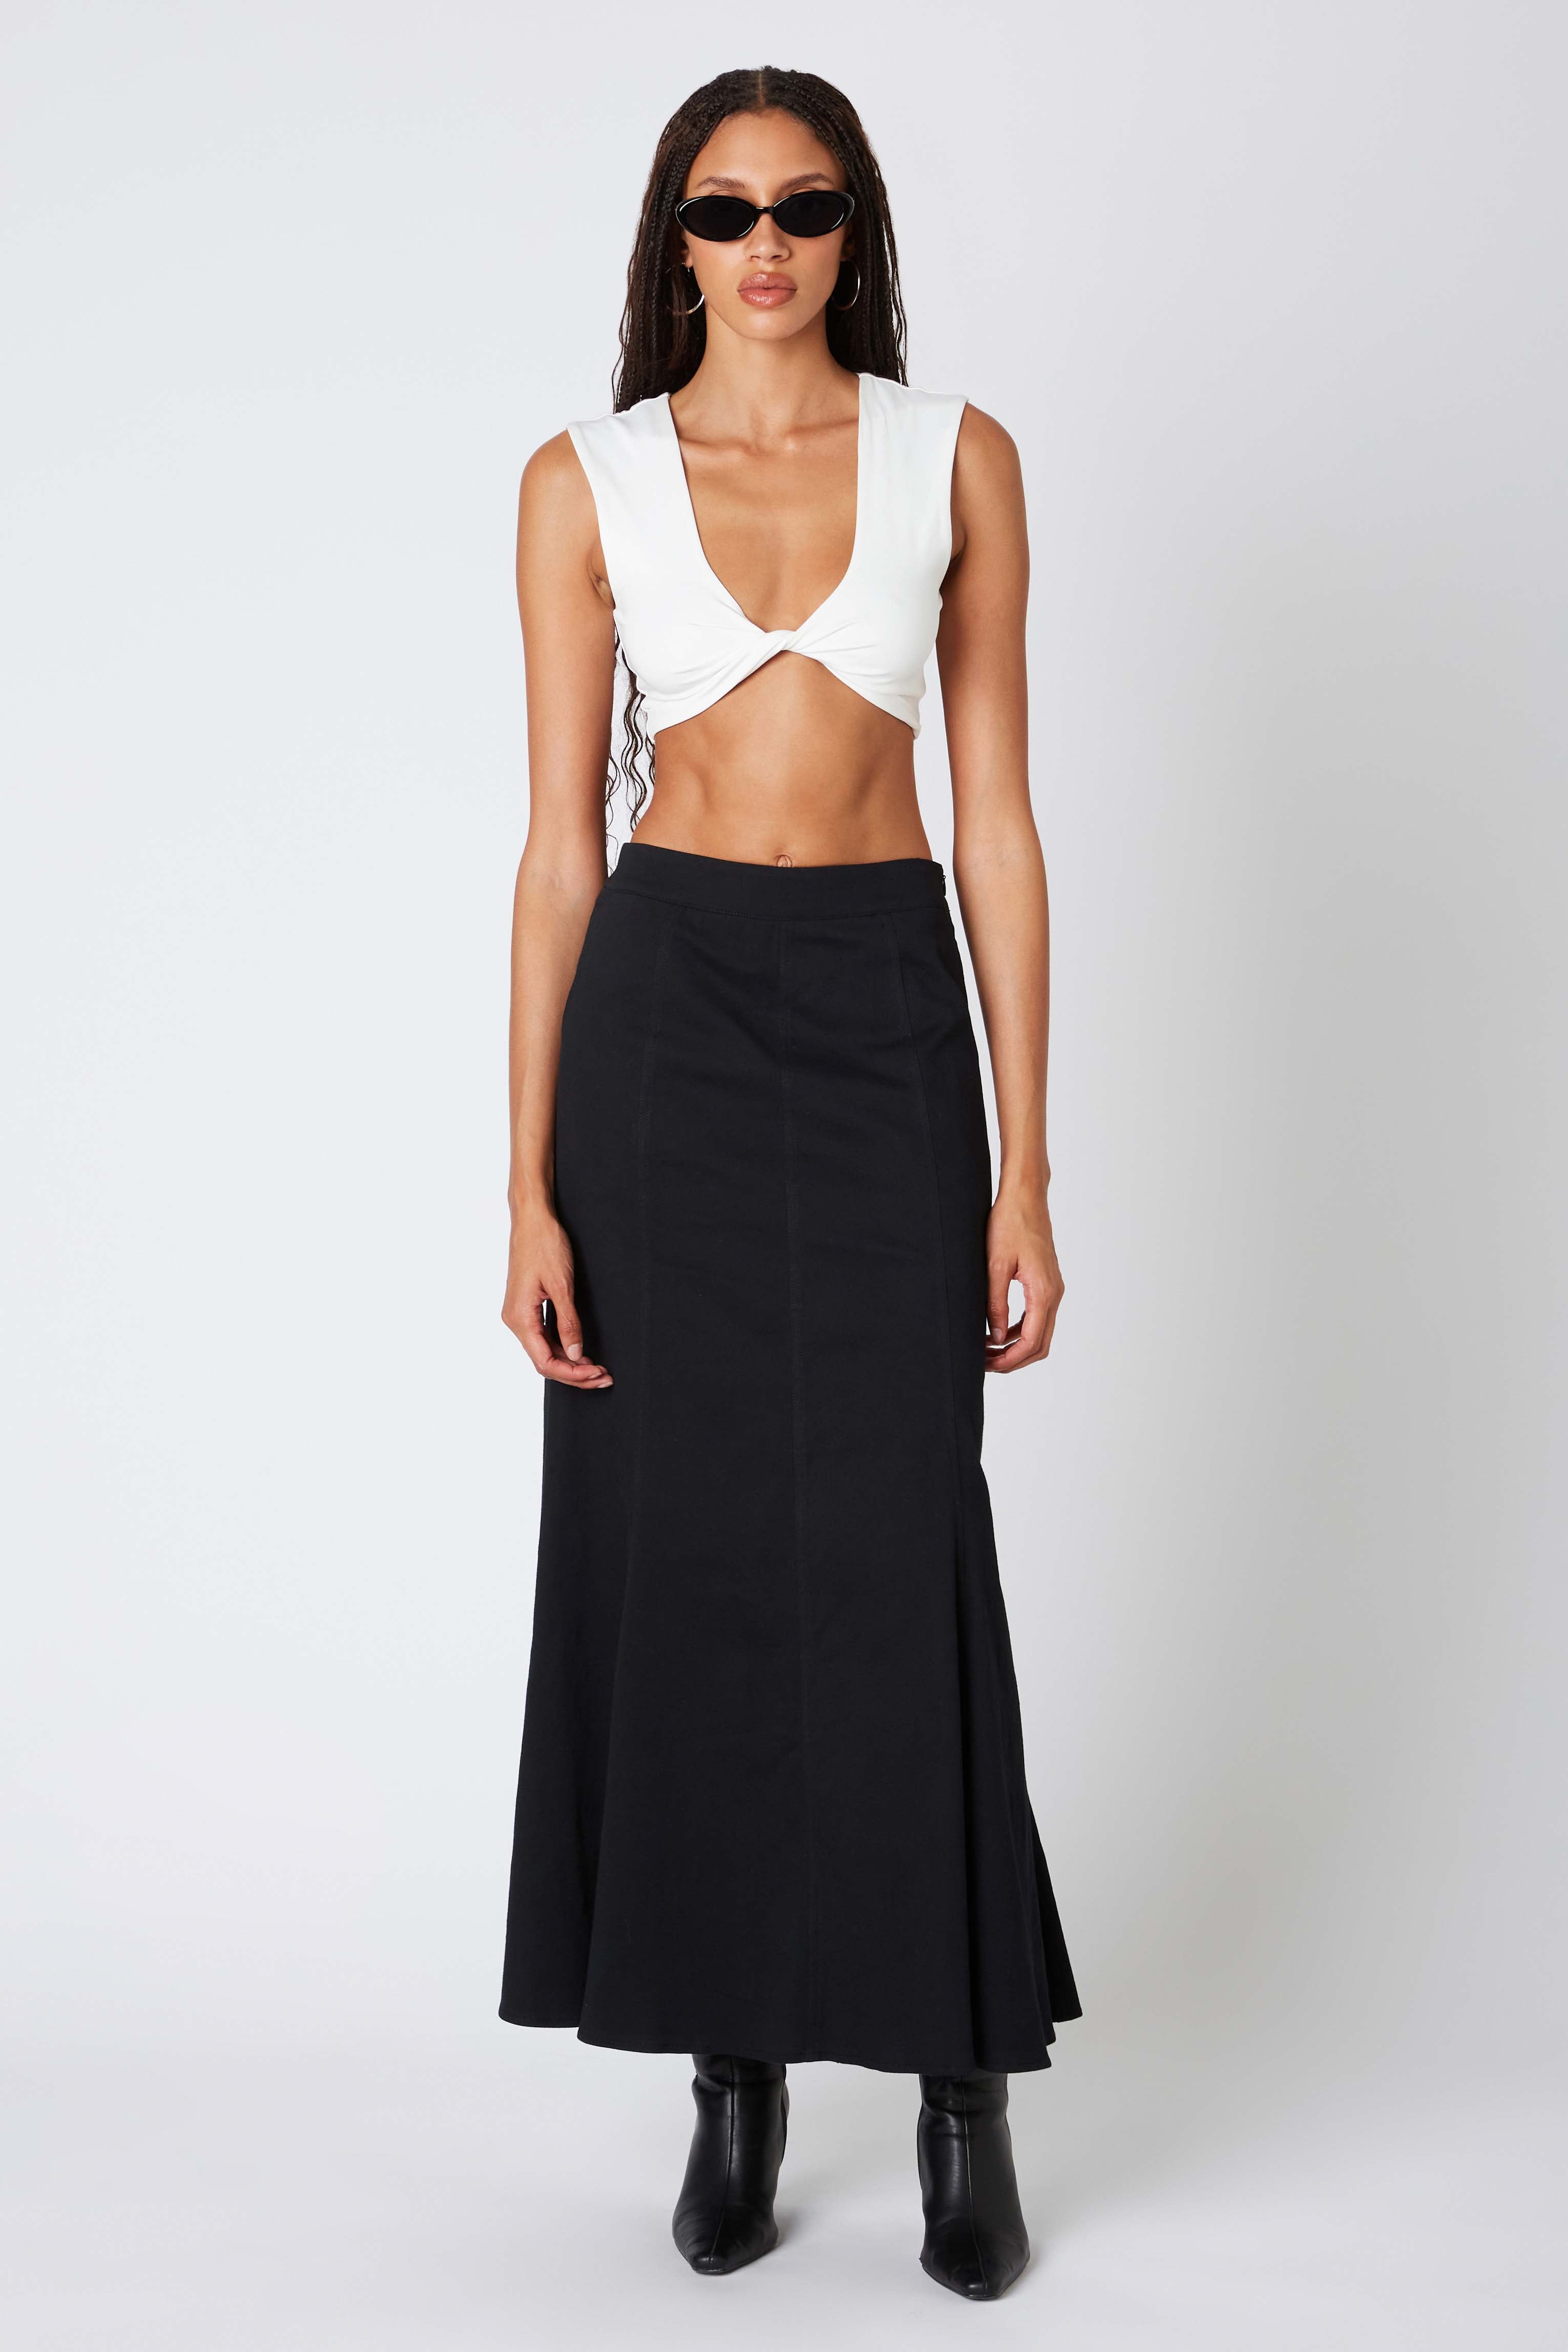 Twill Maxi Skirt in Black Front View